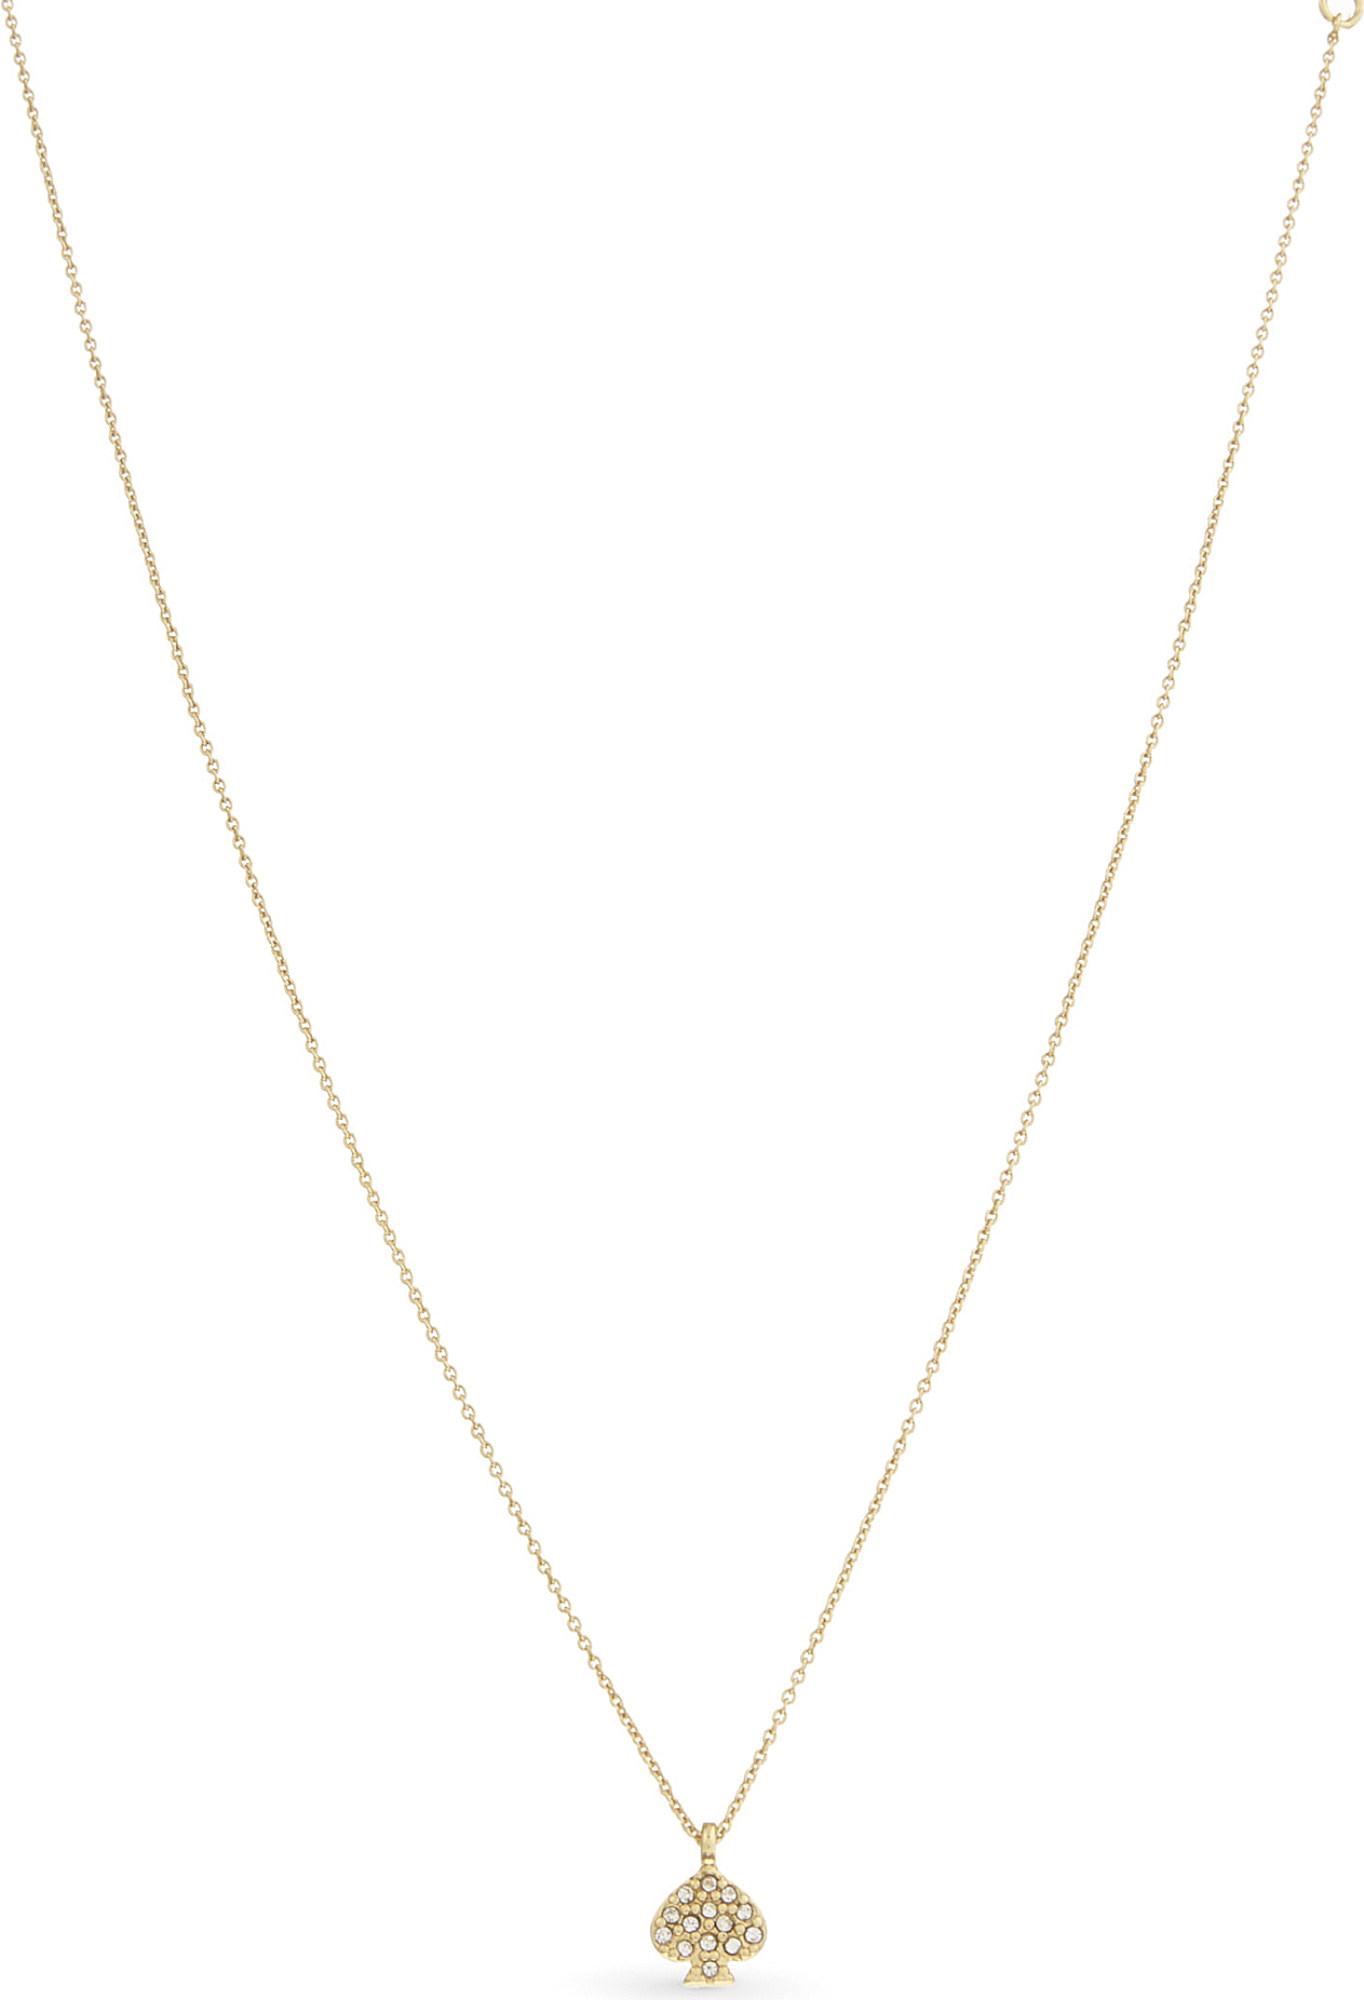 Top 63+ imagen kate and spade necklace - Thptnganamst.edu.vn